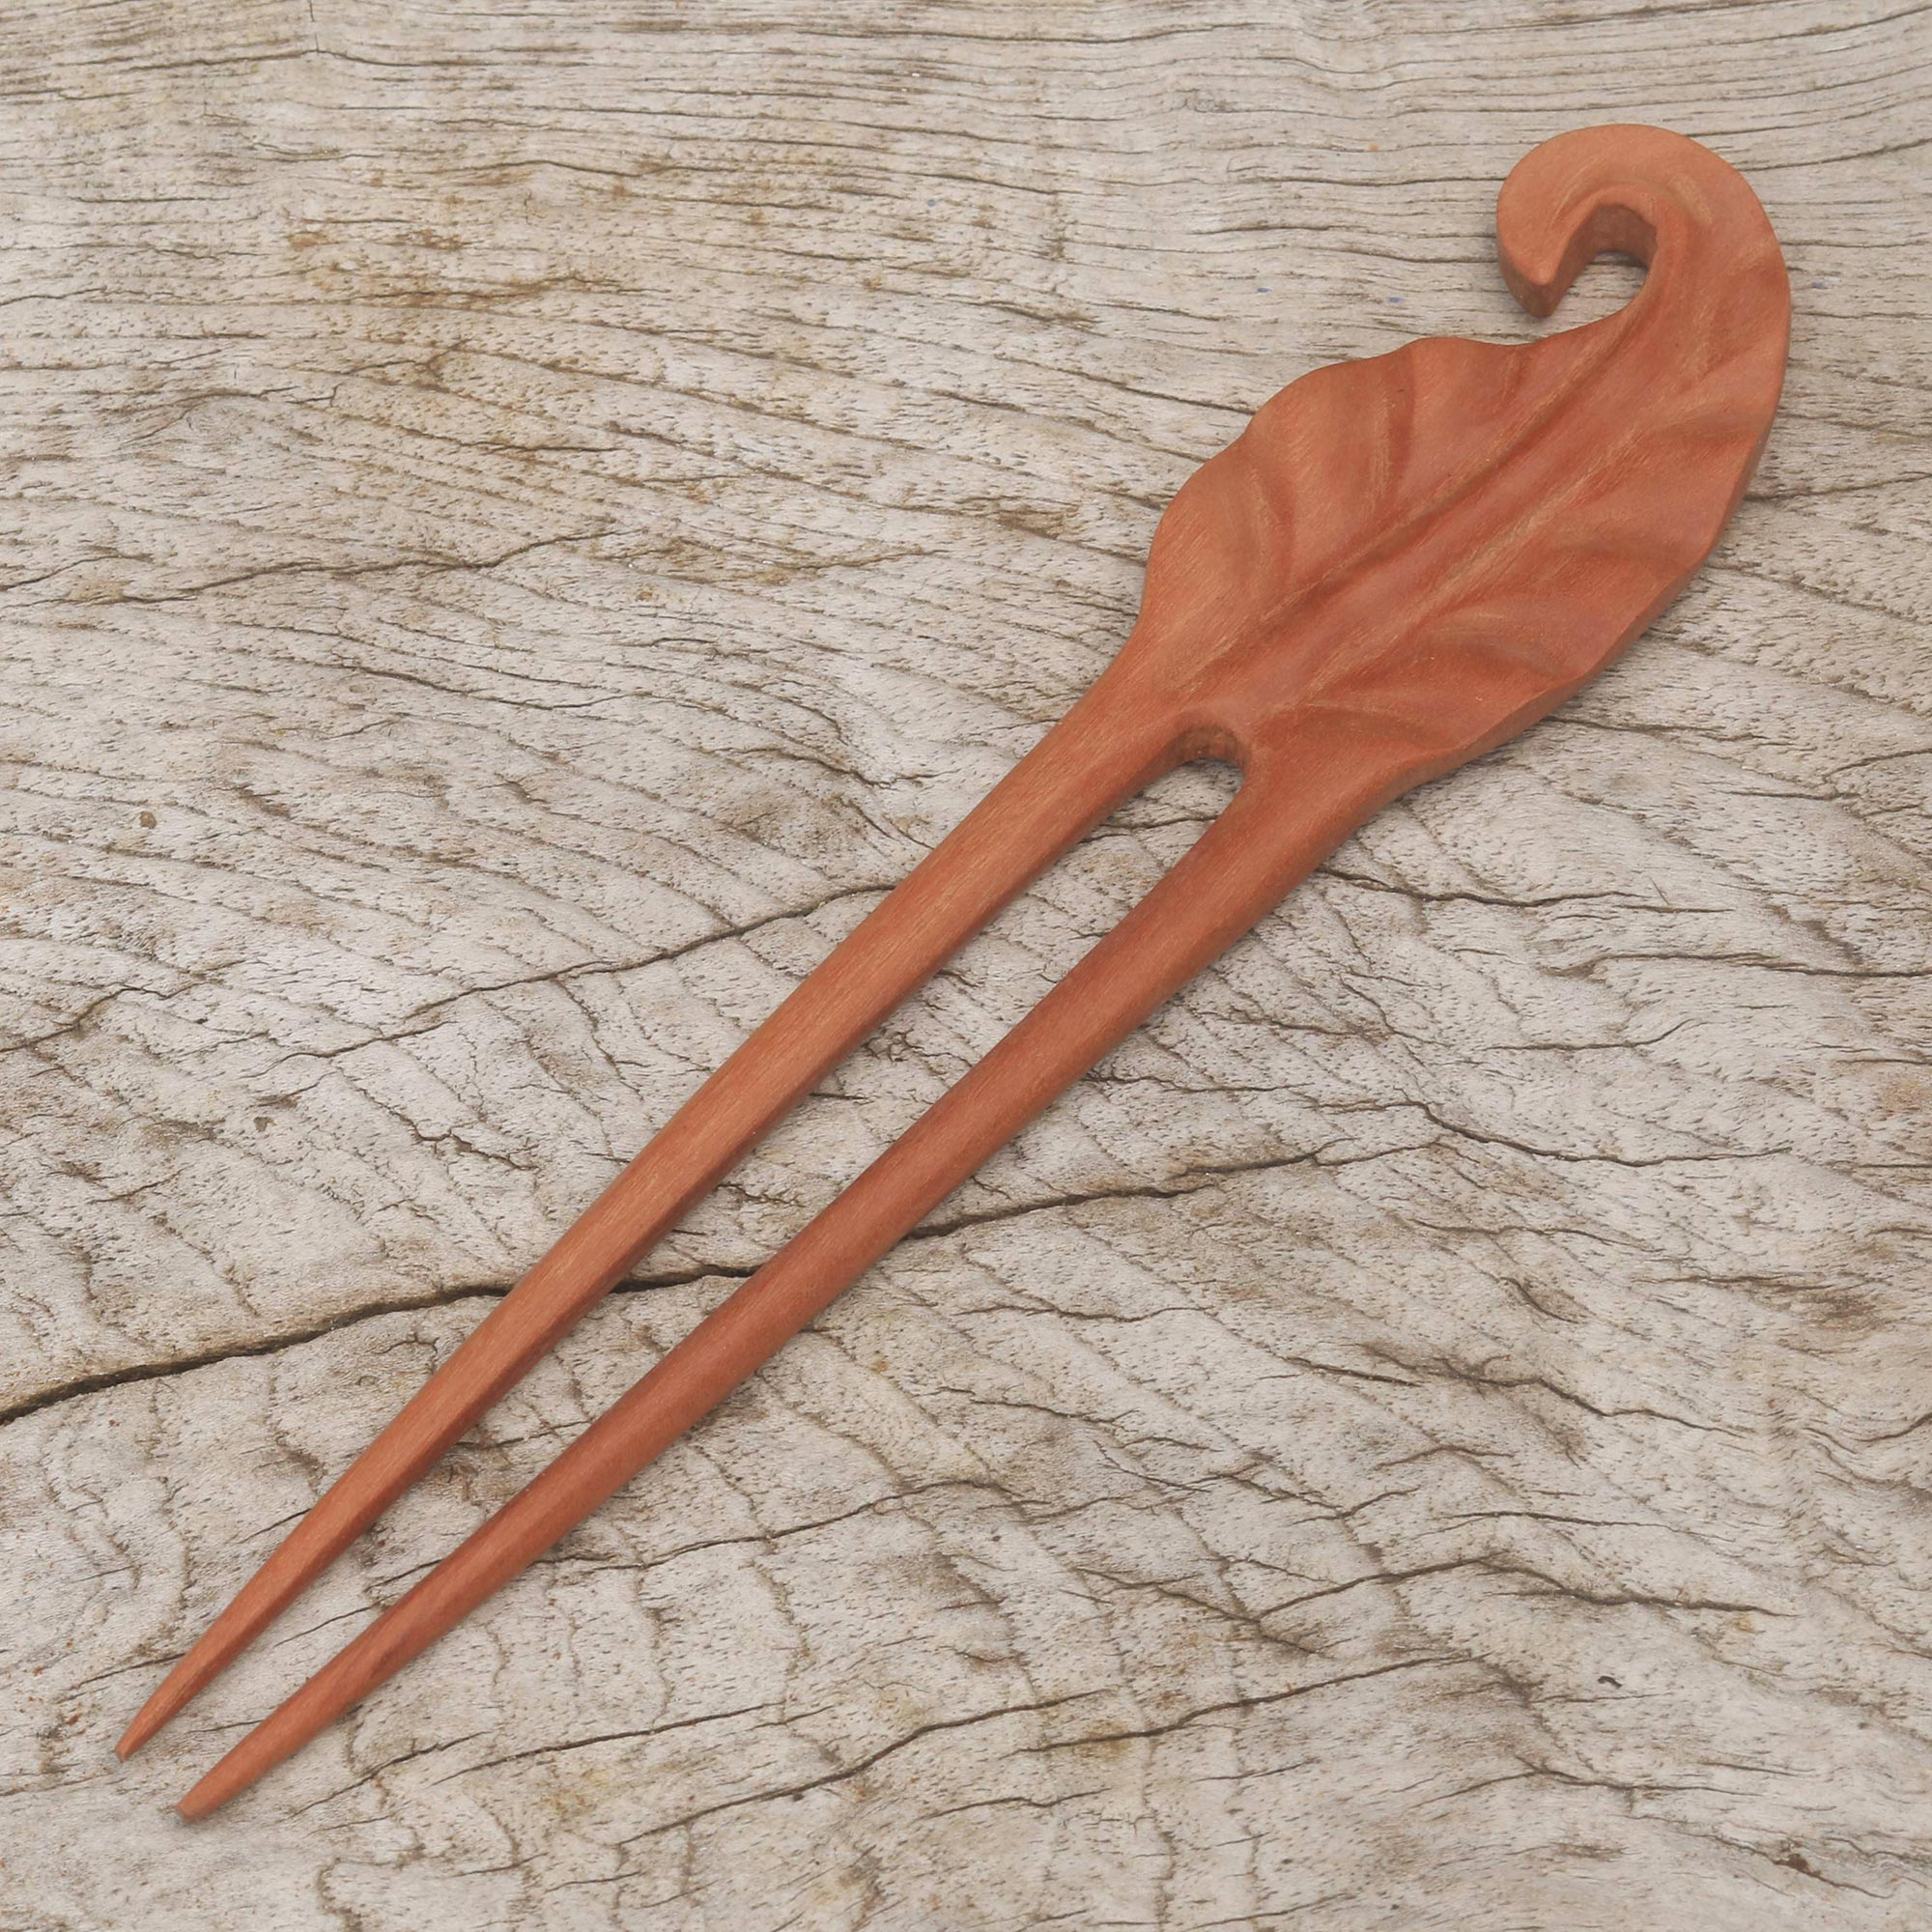 I made wooden crescent moon hair pin : WitchesVsPatriarchy | Hair pins, Diy  hairstyles, Hair accessories